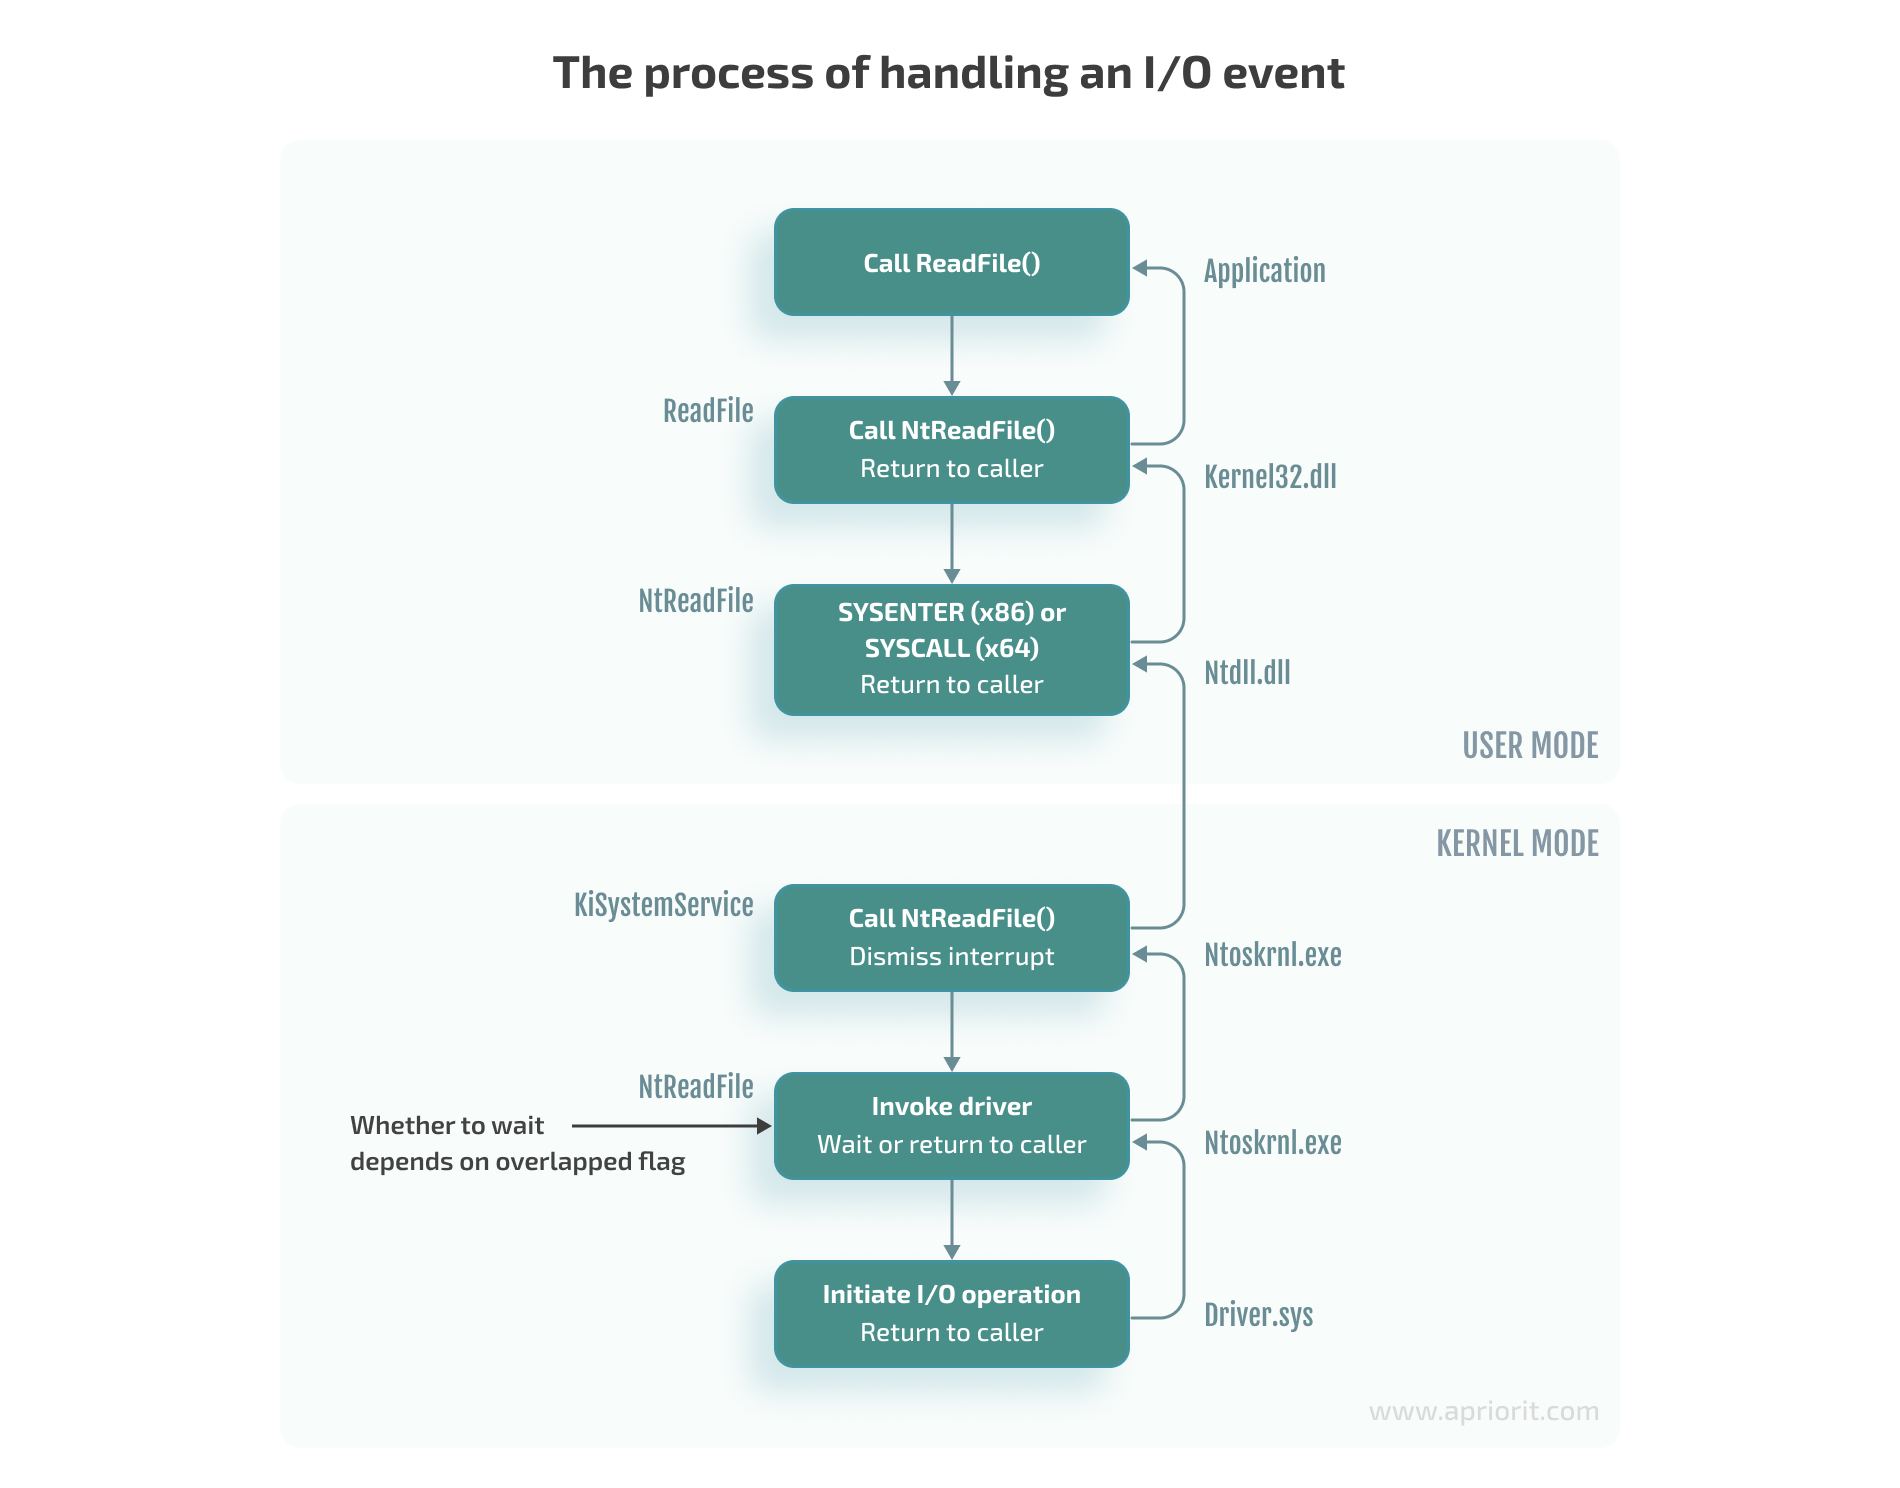 The process of handling an I/O event